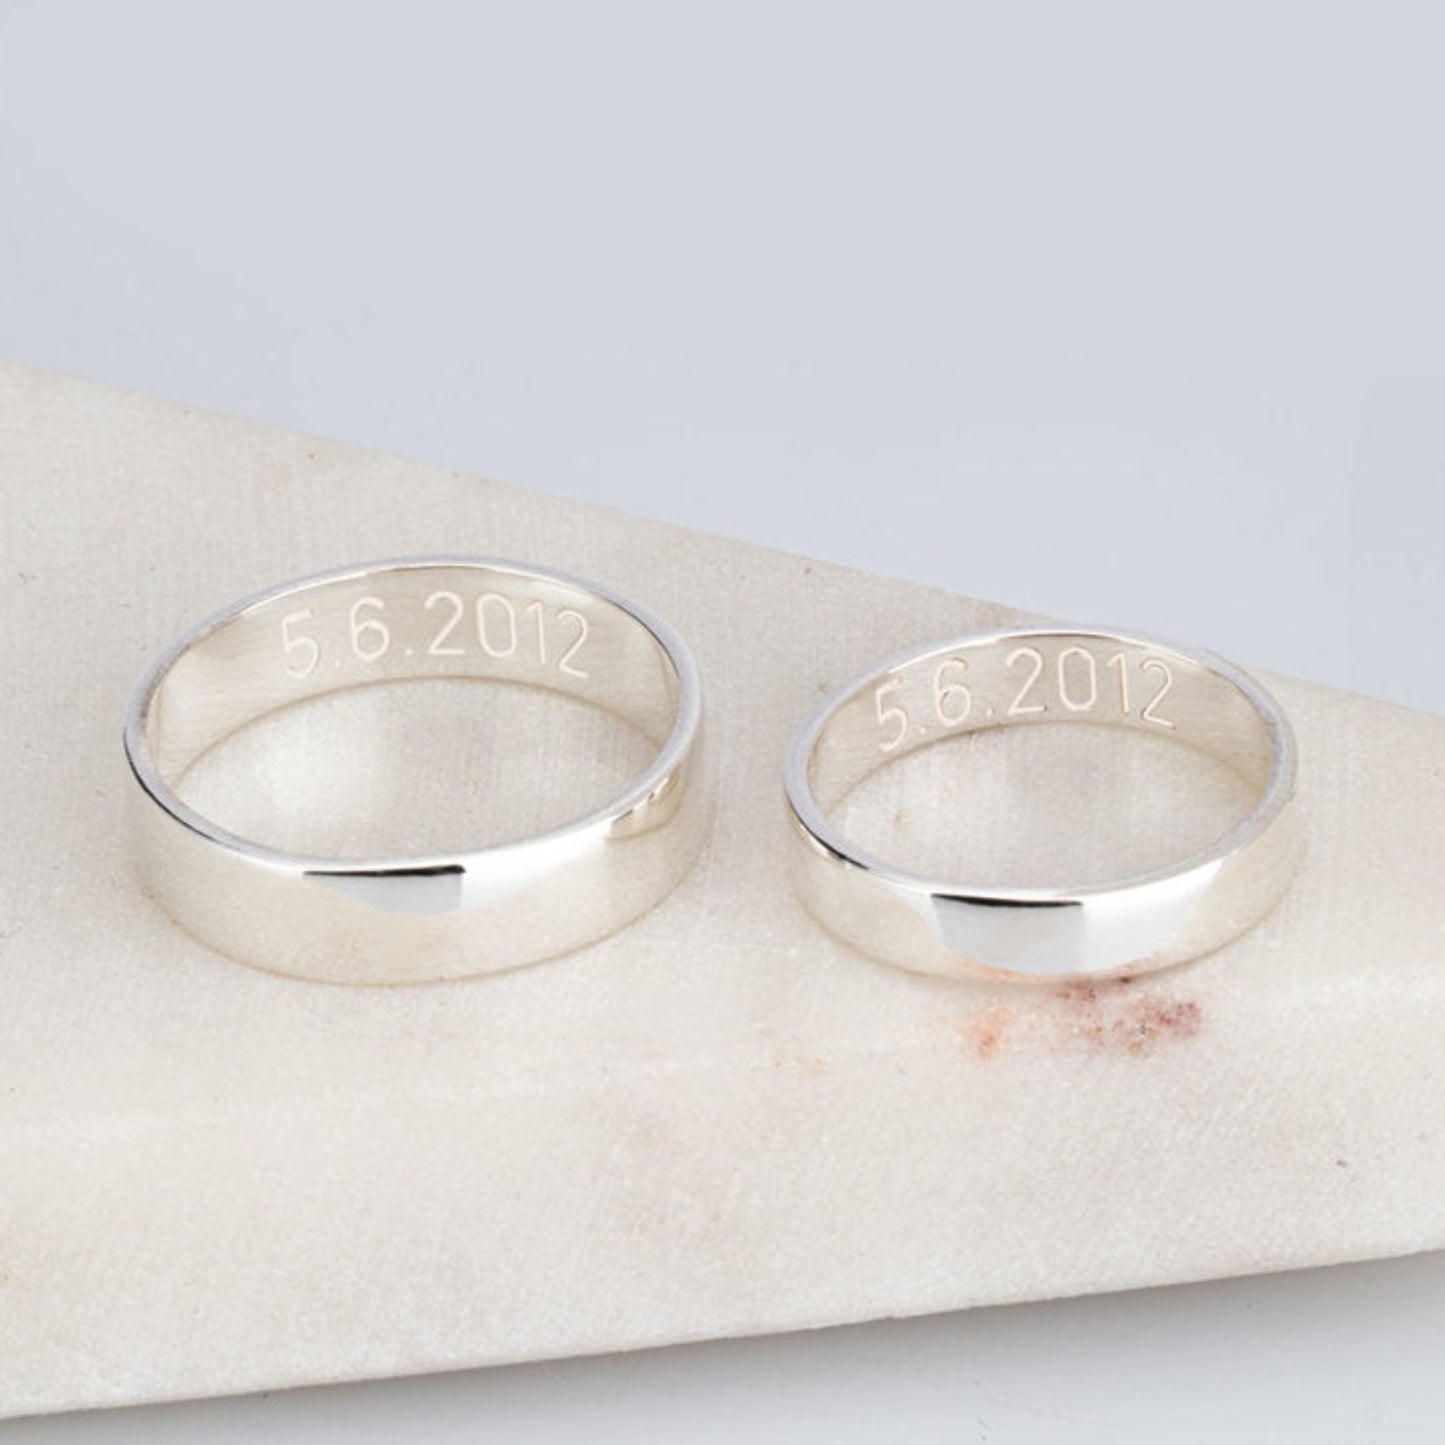 Engraved Rings Set For Couples in 925 Sterling Silver